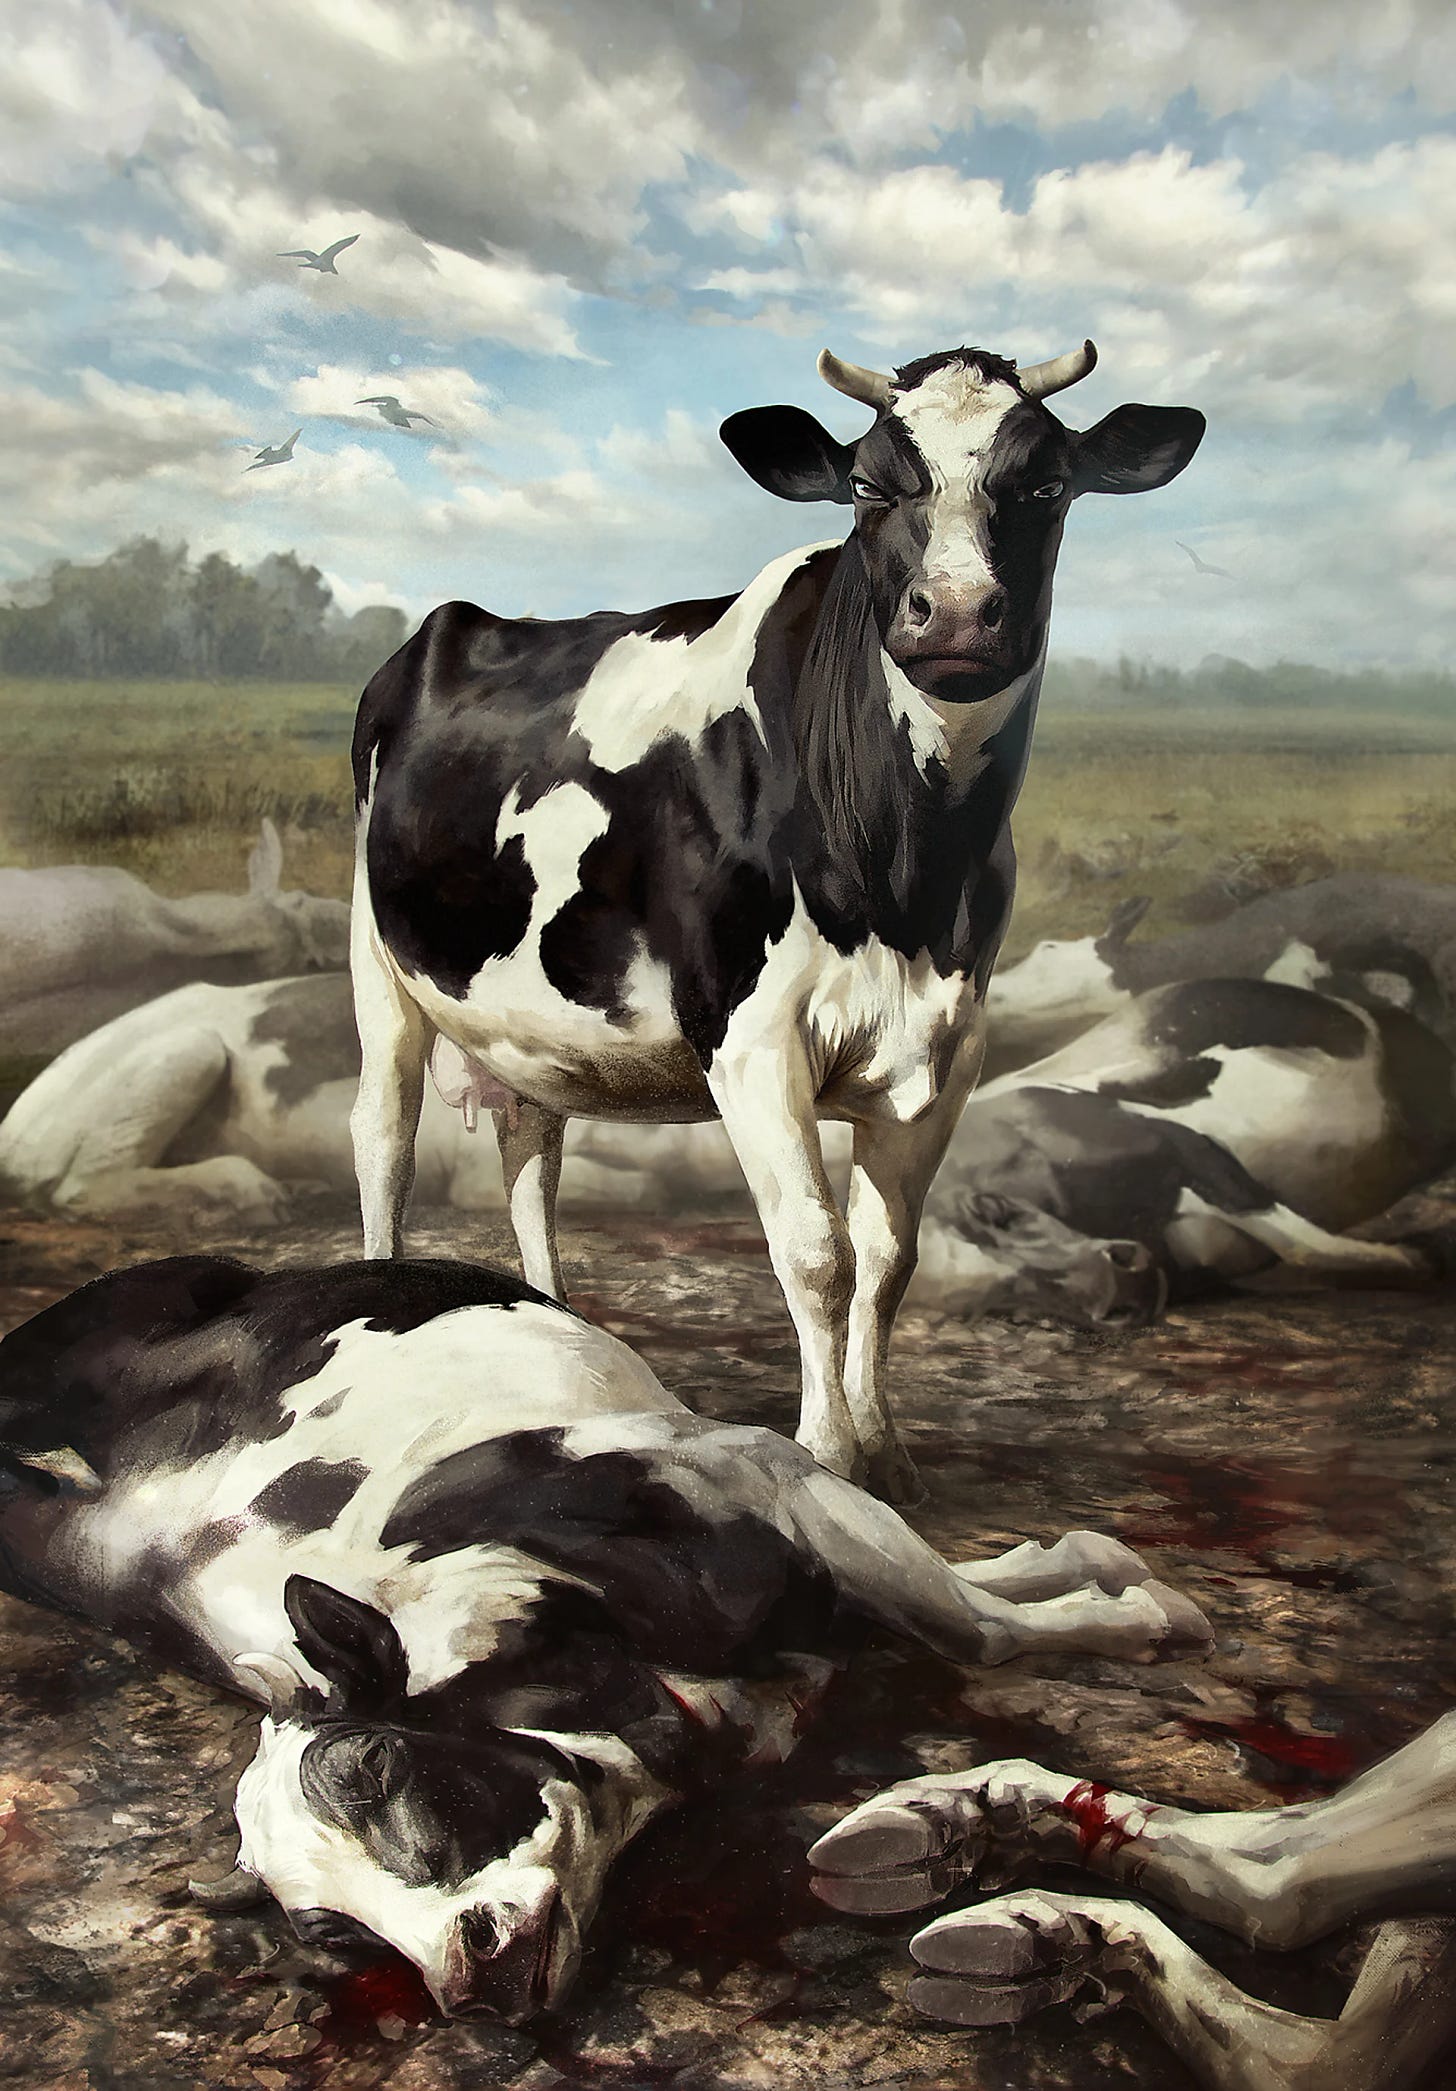 This delightful image of an apparently murderous cow almost looks like a parody on 18th century animal paintings in its execution and composition.